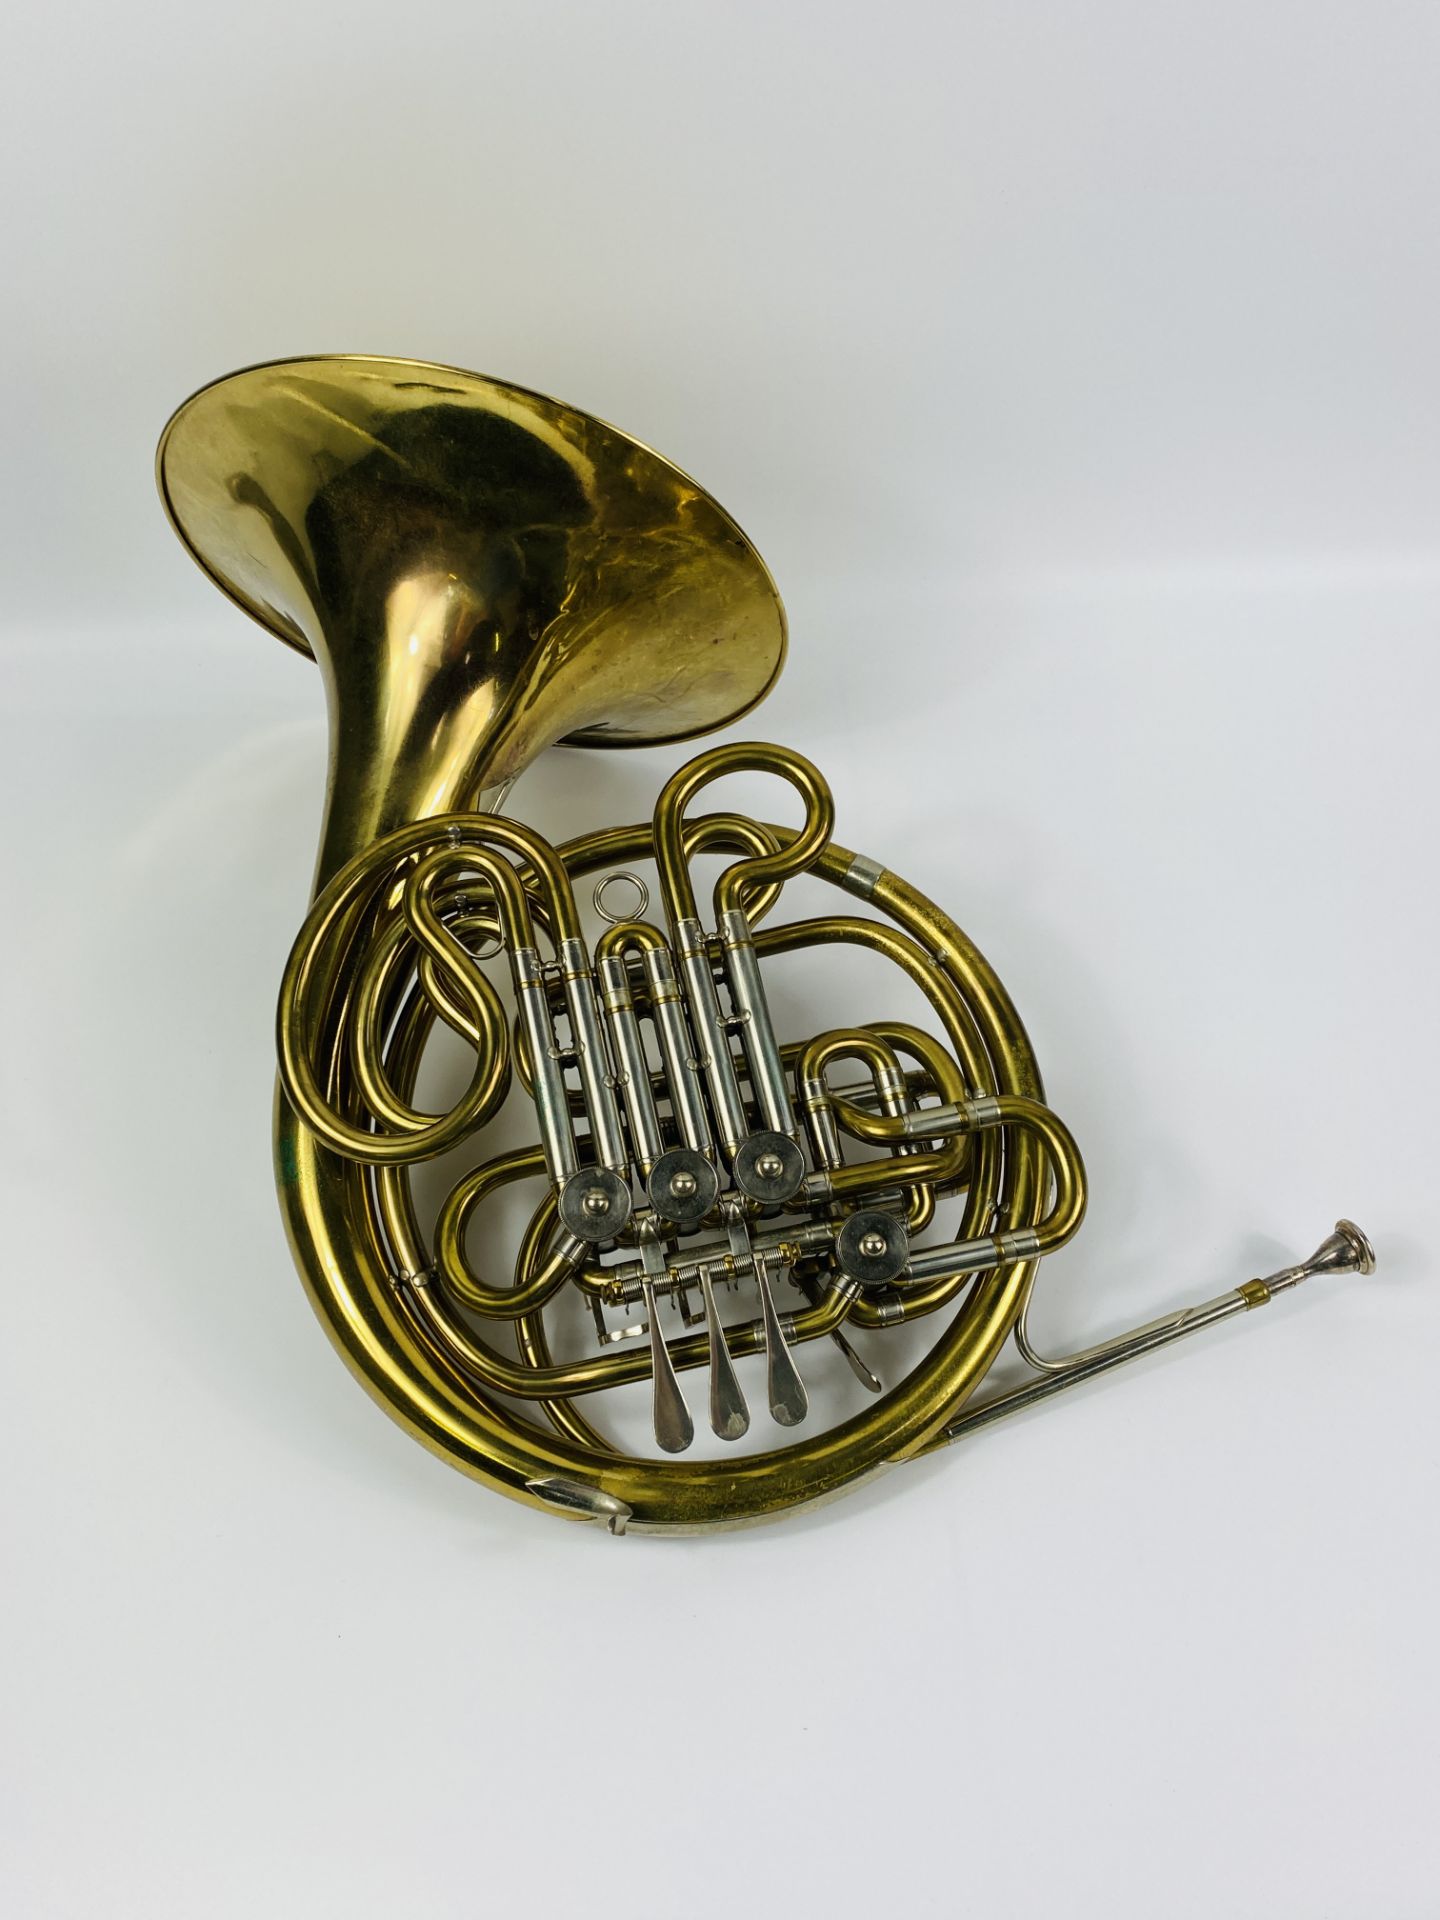 French horn in carry case - Image 4 of 8